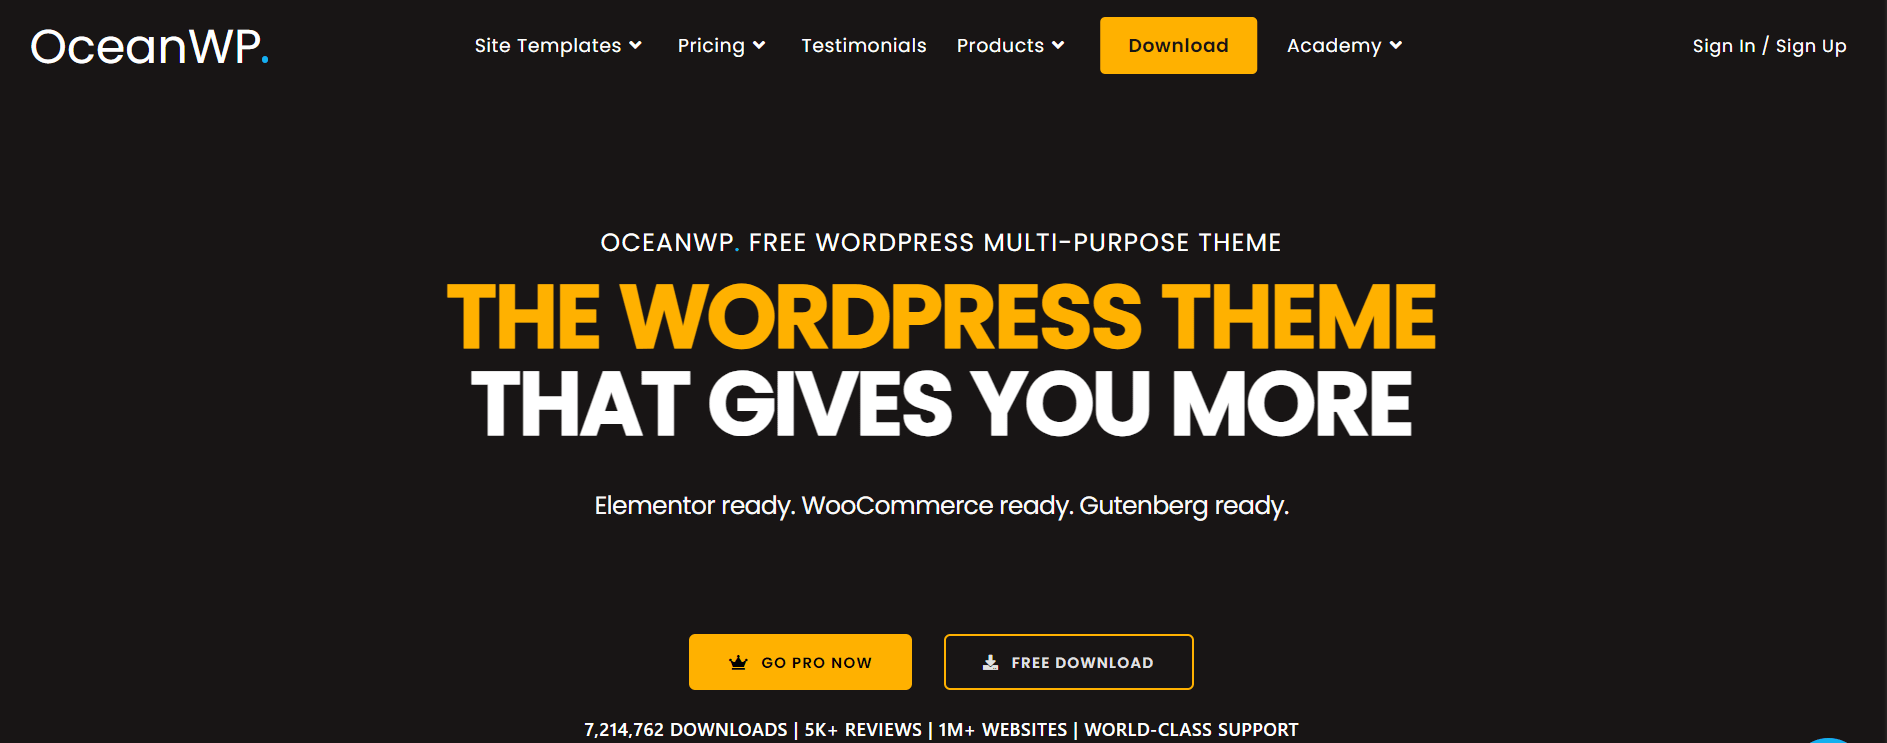 Screenshot of OceanWP's homepage promoting their free multi-purpose WordPress theme that's Elementor and WooCommerce ready, with a download count and customer support details.